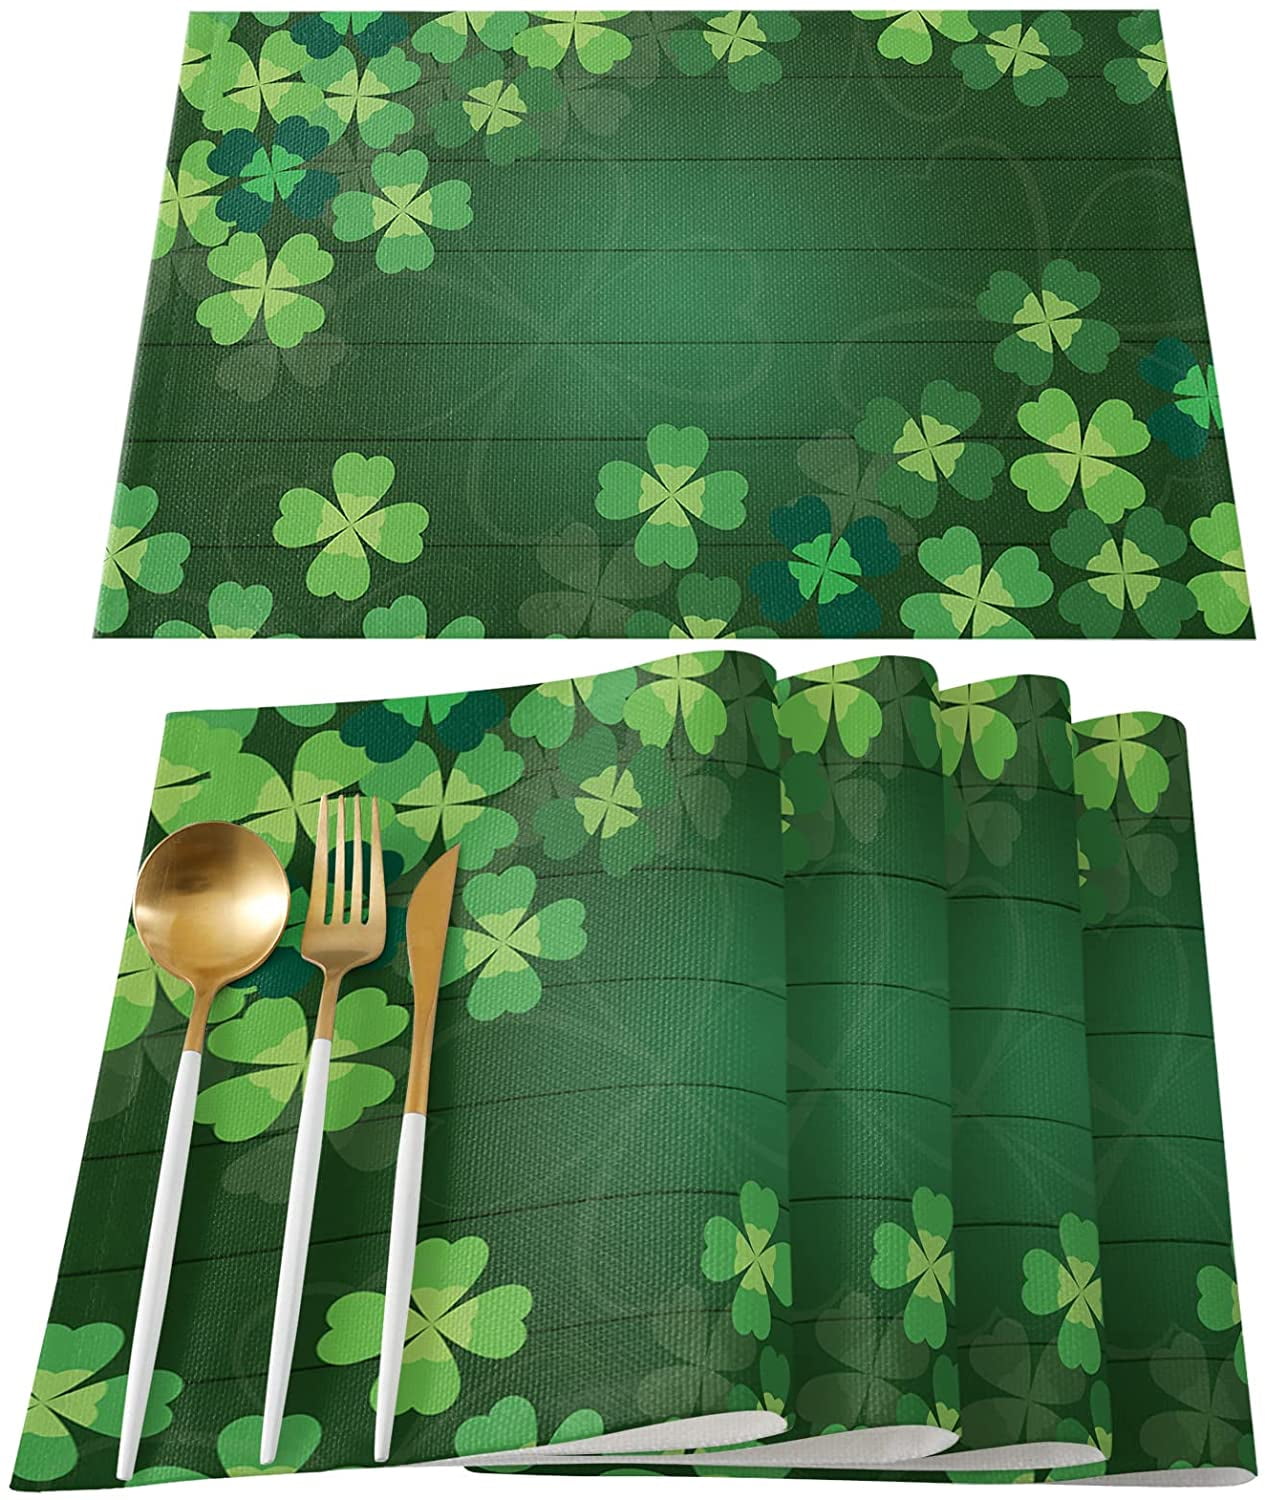 Happy St Patricks Day Gnomes Shamrock Lucky Placemats Set of 4 Cotton Line Fabric Heat Resistant Table Mats Non-Slip Washable Decoration for Home Kitchen Dining Wedding Holiday Party,Green White